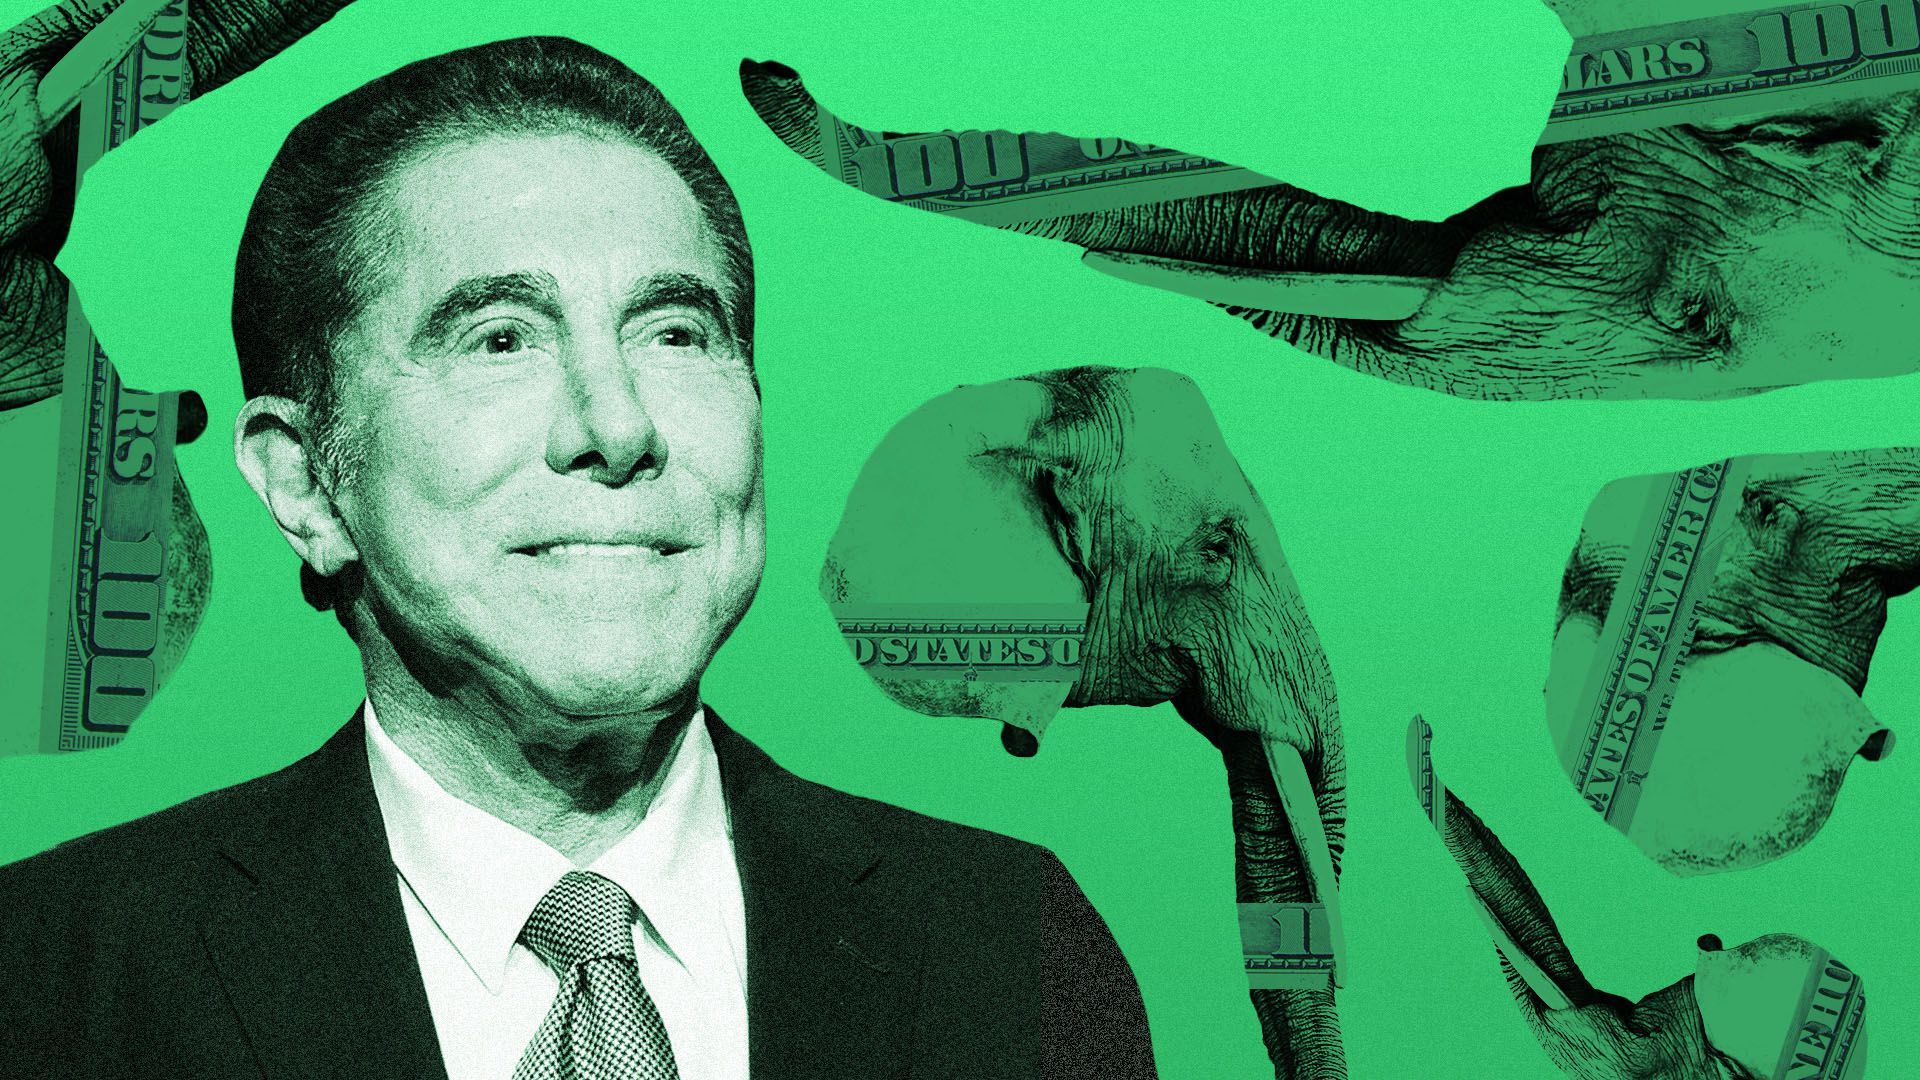 Photo illustration of Steve Wynn against a background of elephant heads and dollar bill elements.